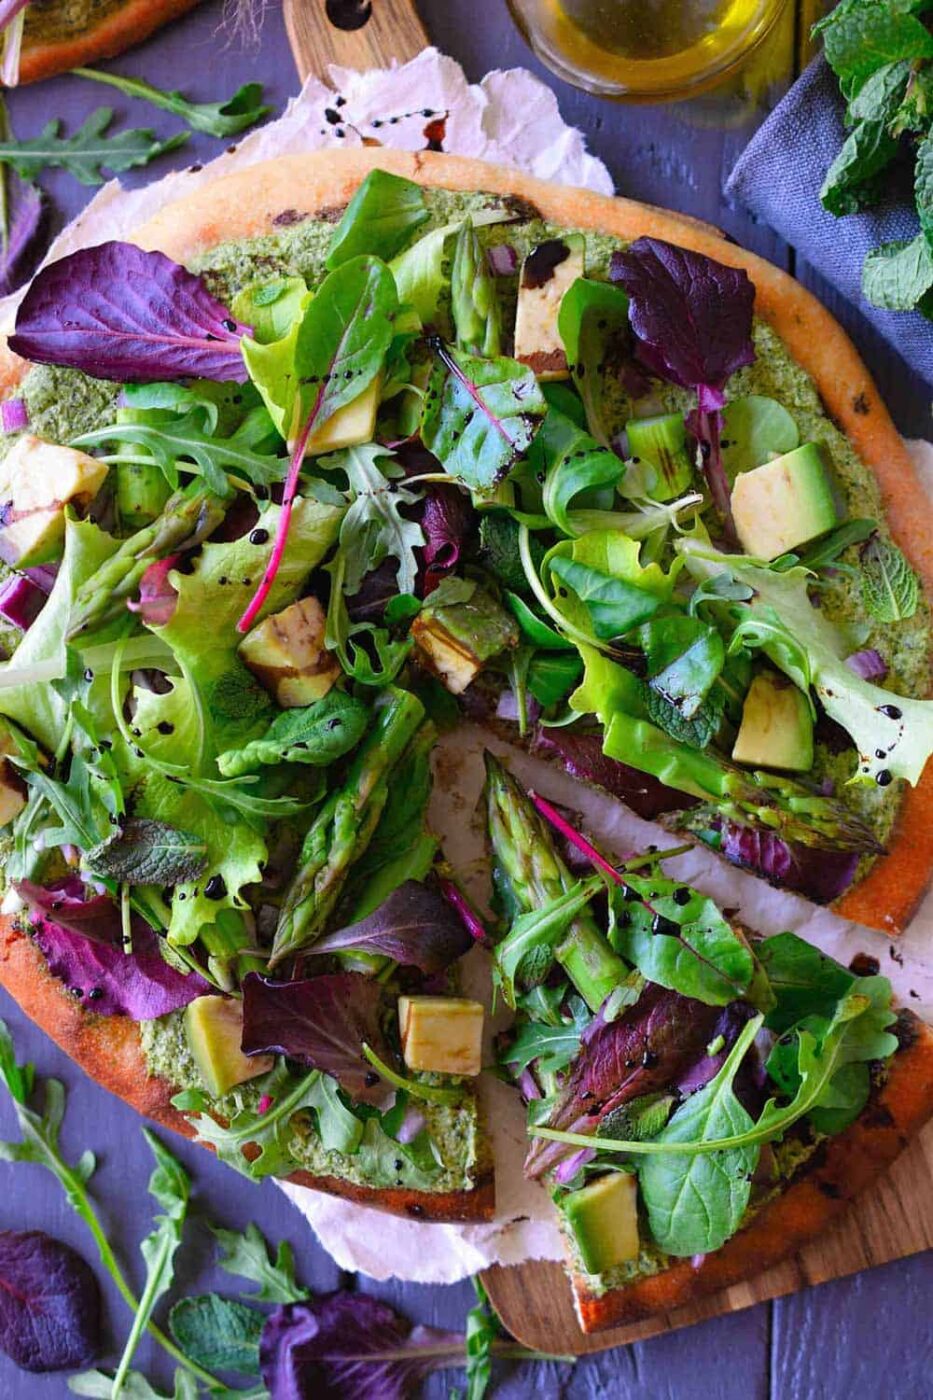 Green pizza with herbed vegan cashew cheese + 15 Farmers market recipes to make in April! Delicious, vegetarian, (mostly) healthy spring recipes made with fresh, seasonal produce from your local farmers market or CSA bin. Eat local! // Rhubarbarians